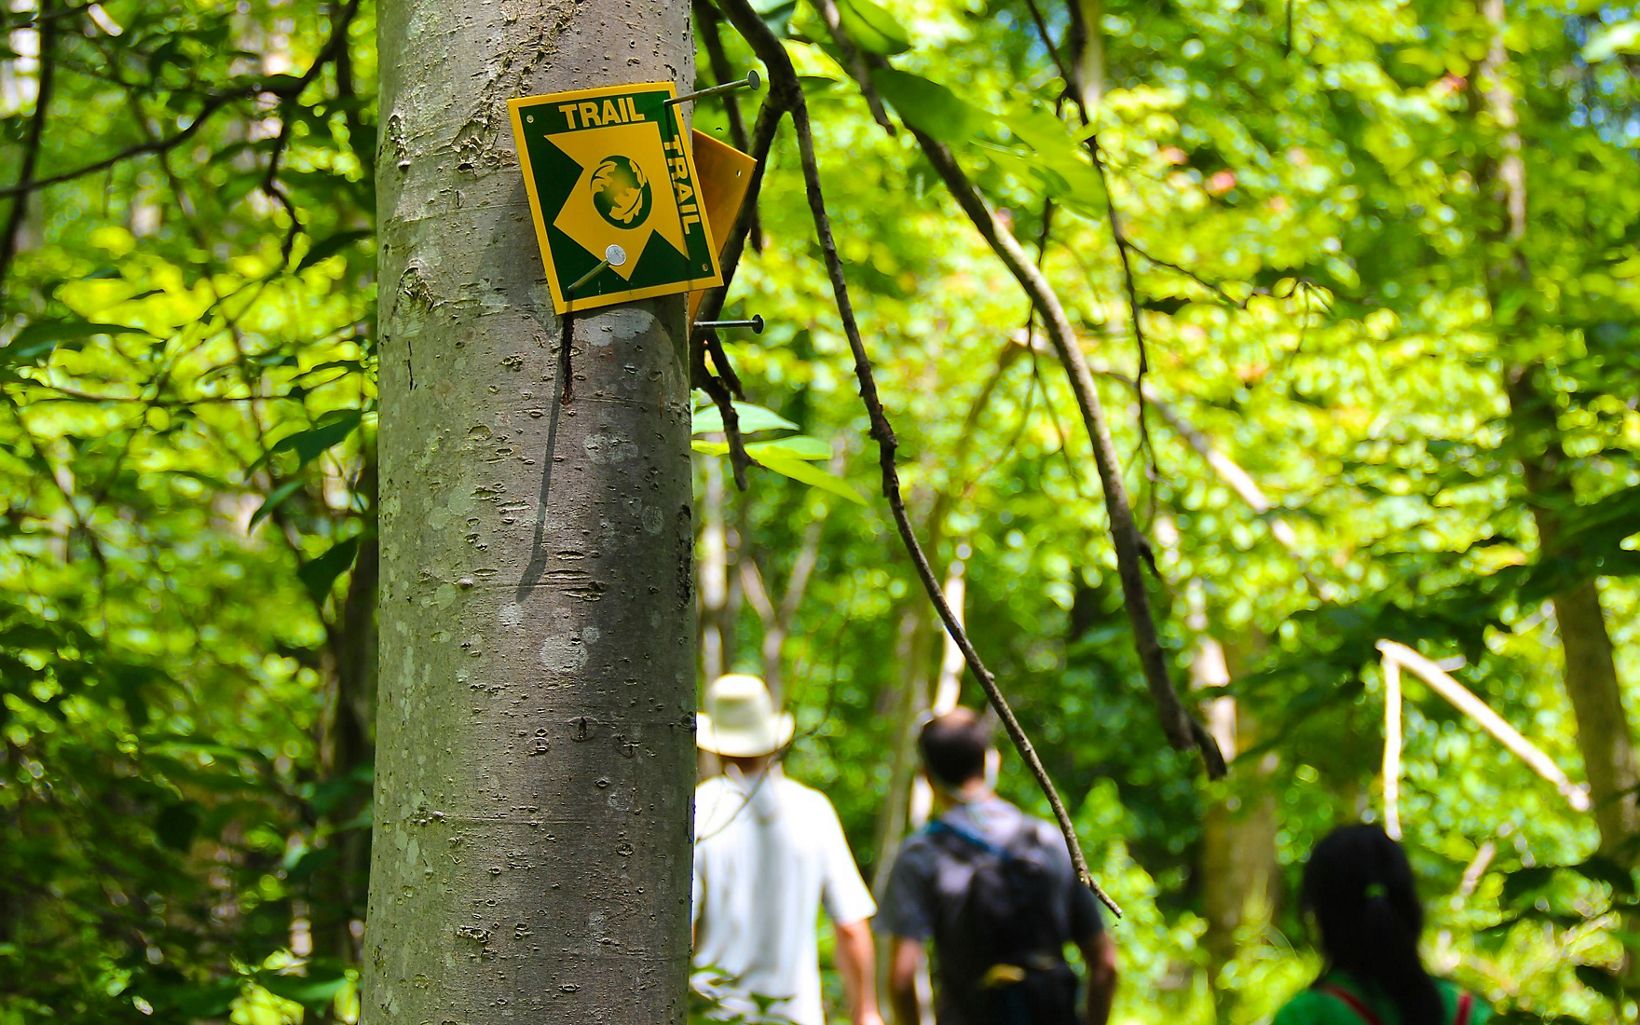 A yellow and green square plastic trail blaze is nailed to the trunk of a tree. Three people are seen from behind walking along a trail.